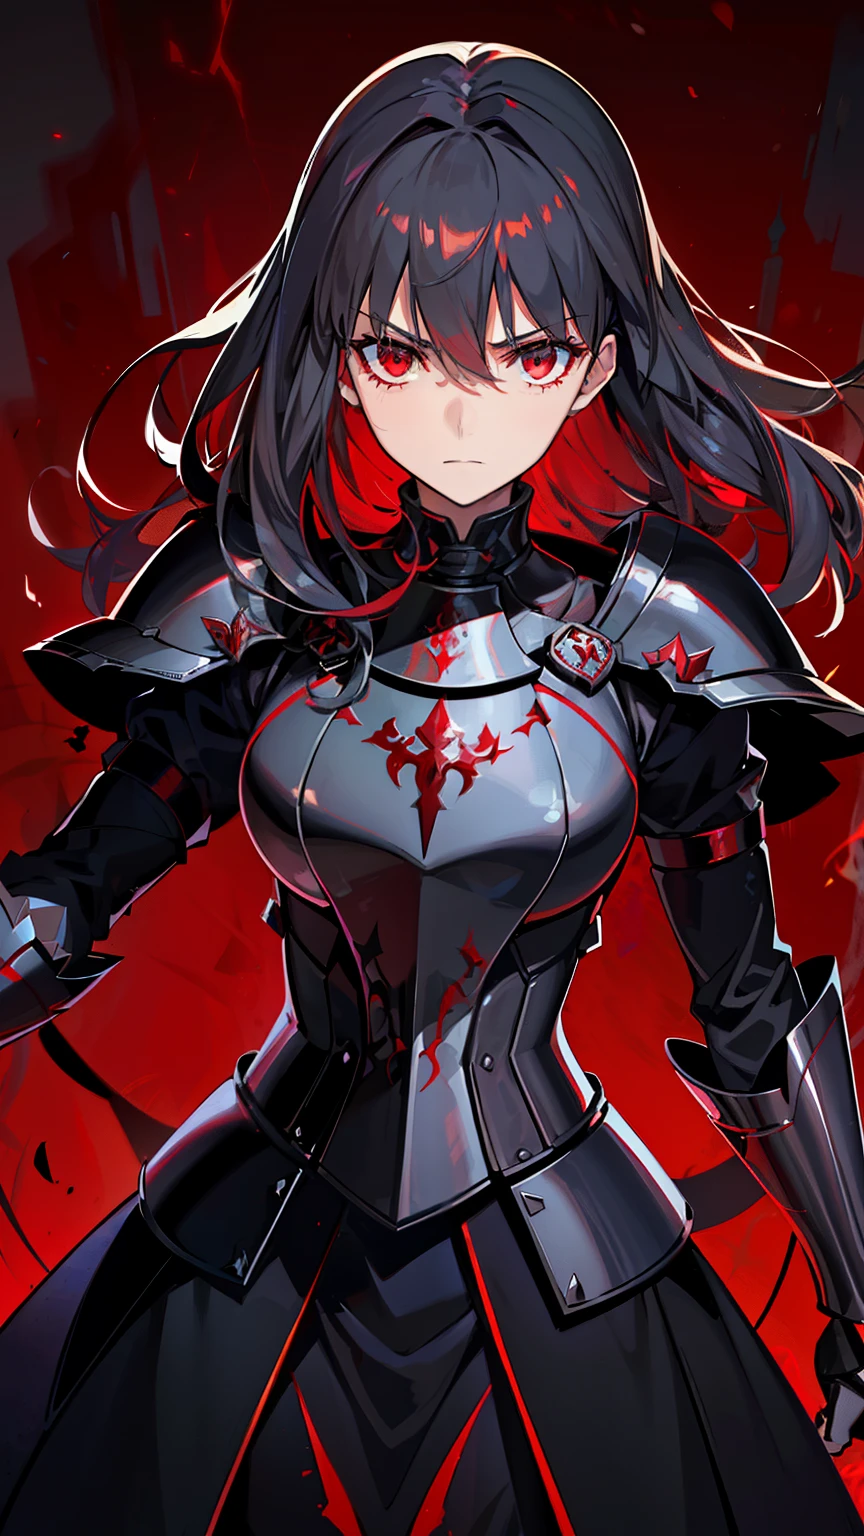 (high-quality, breathtaking),(expressive eyes, perfect face) 1female, girl , solo, young adult, long hair length, wavy curly hair, soft wave, black hair color, red highlights in hair, deep red eye color, background, music, serious confident expression, mature, dominant, haunting red background, armor, onyx black armor with red trim, midnight dark armor with red cracks engraved in the exterior, saber alter, alter saber fate stay night, corrupted theme, corrupted armor, red lines on armor, conquerer vibe, red markings on armor, slightly narrow eyes, evil queen, narrow beautiful eyes
